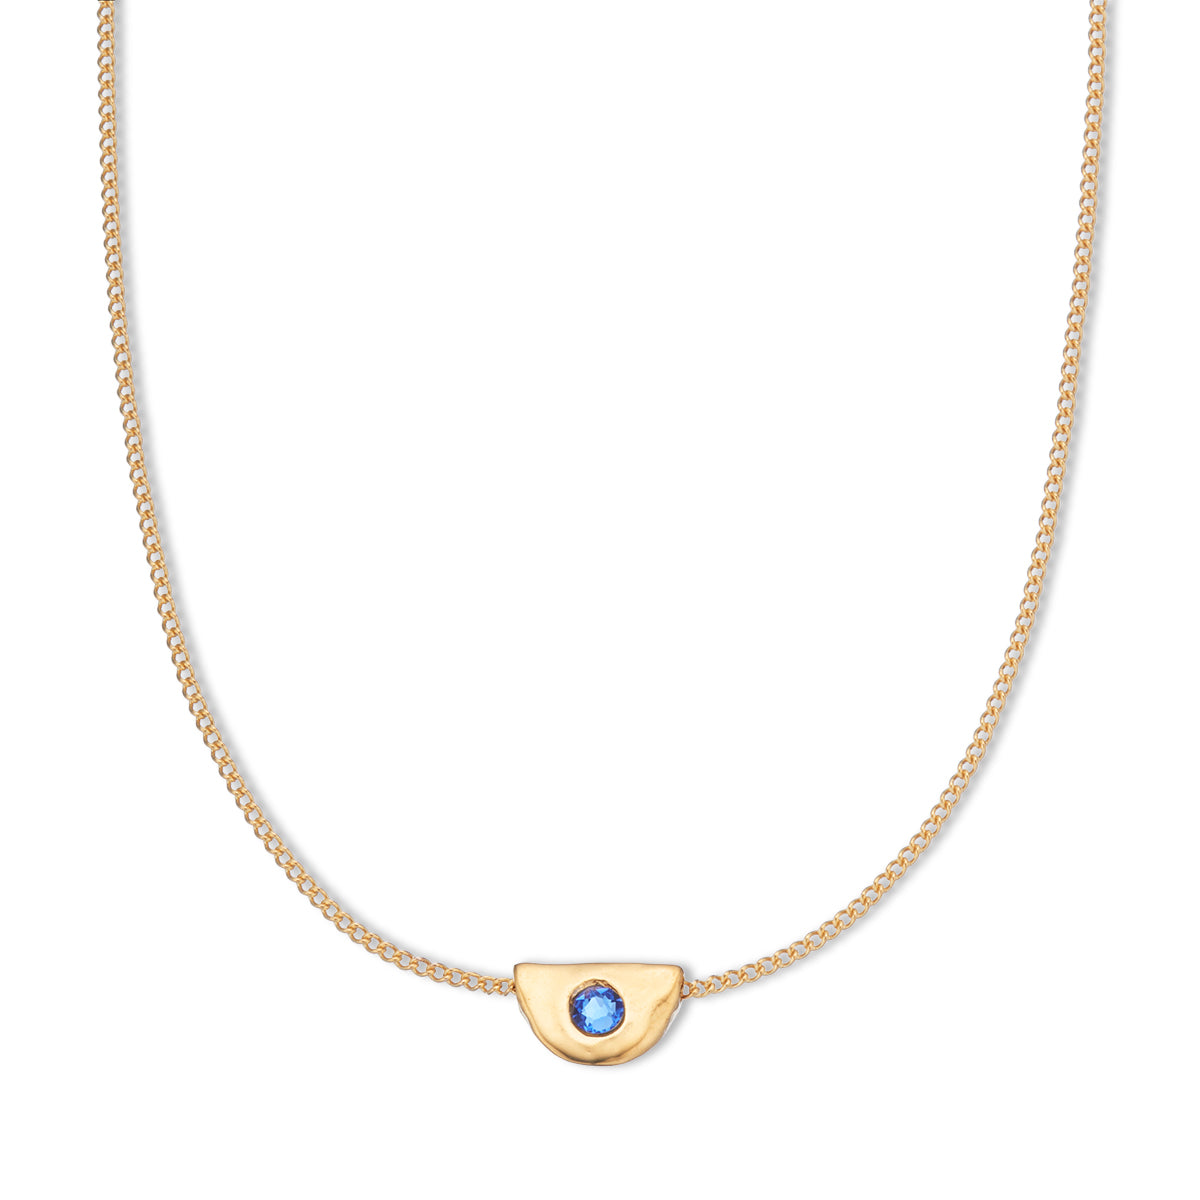 September sapphire birthstone necklace 18k gold plated